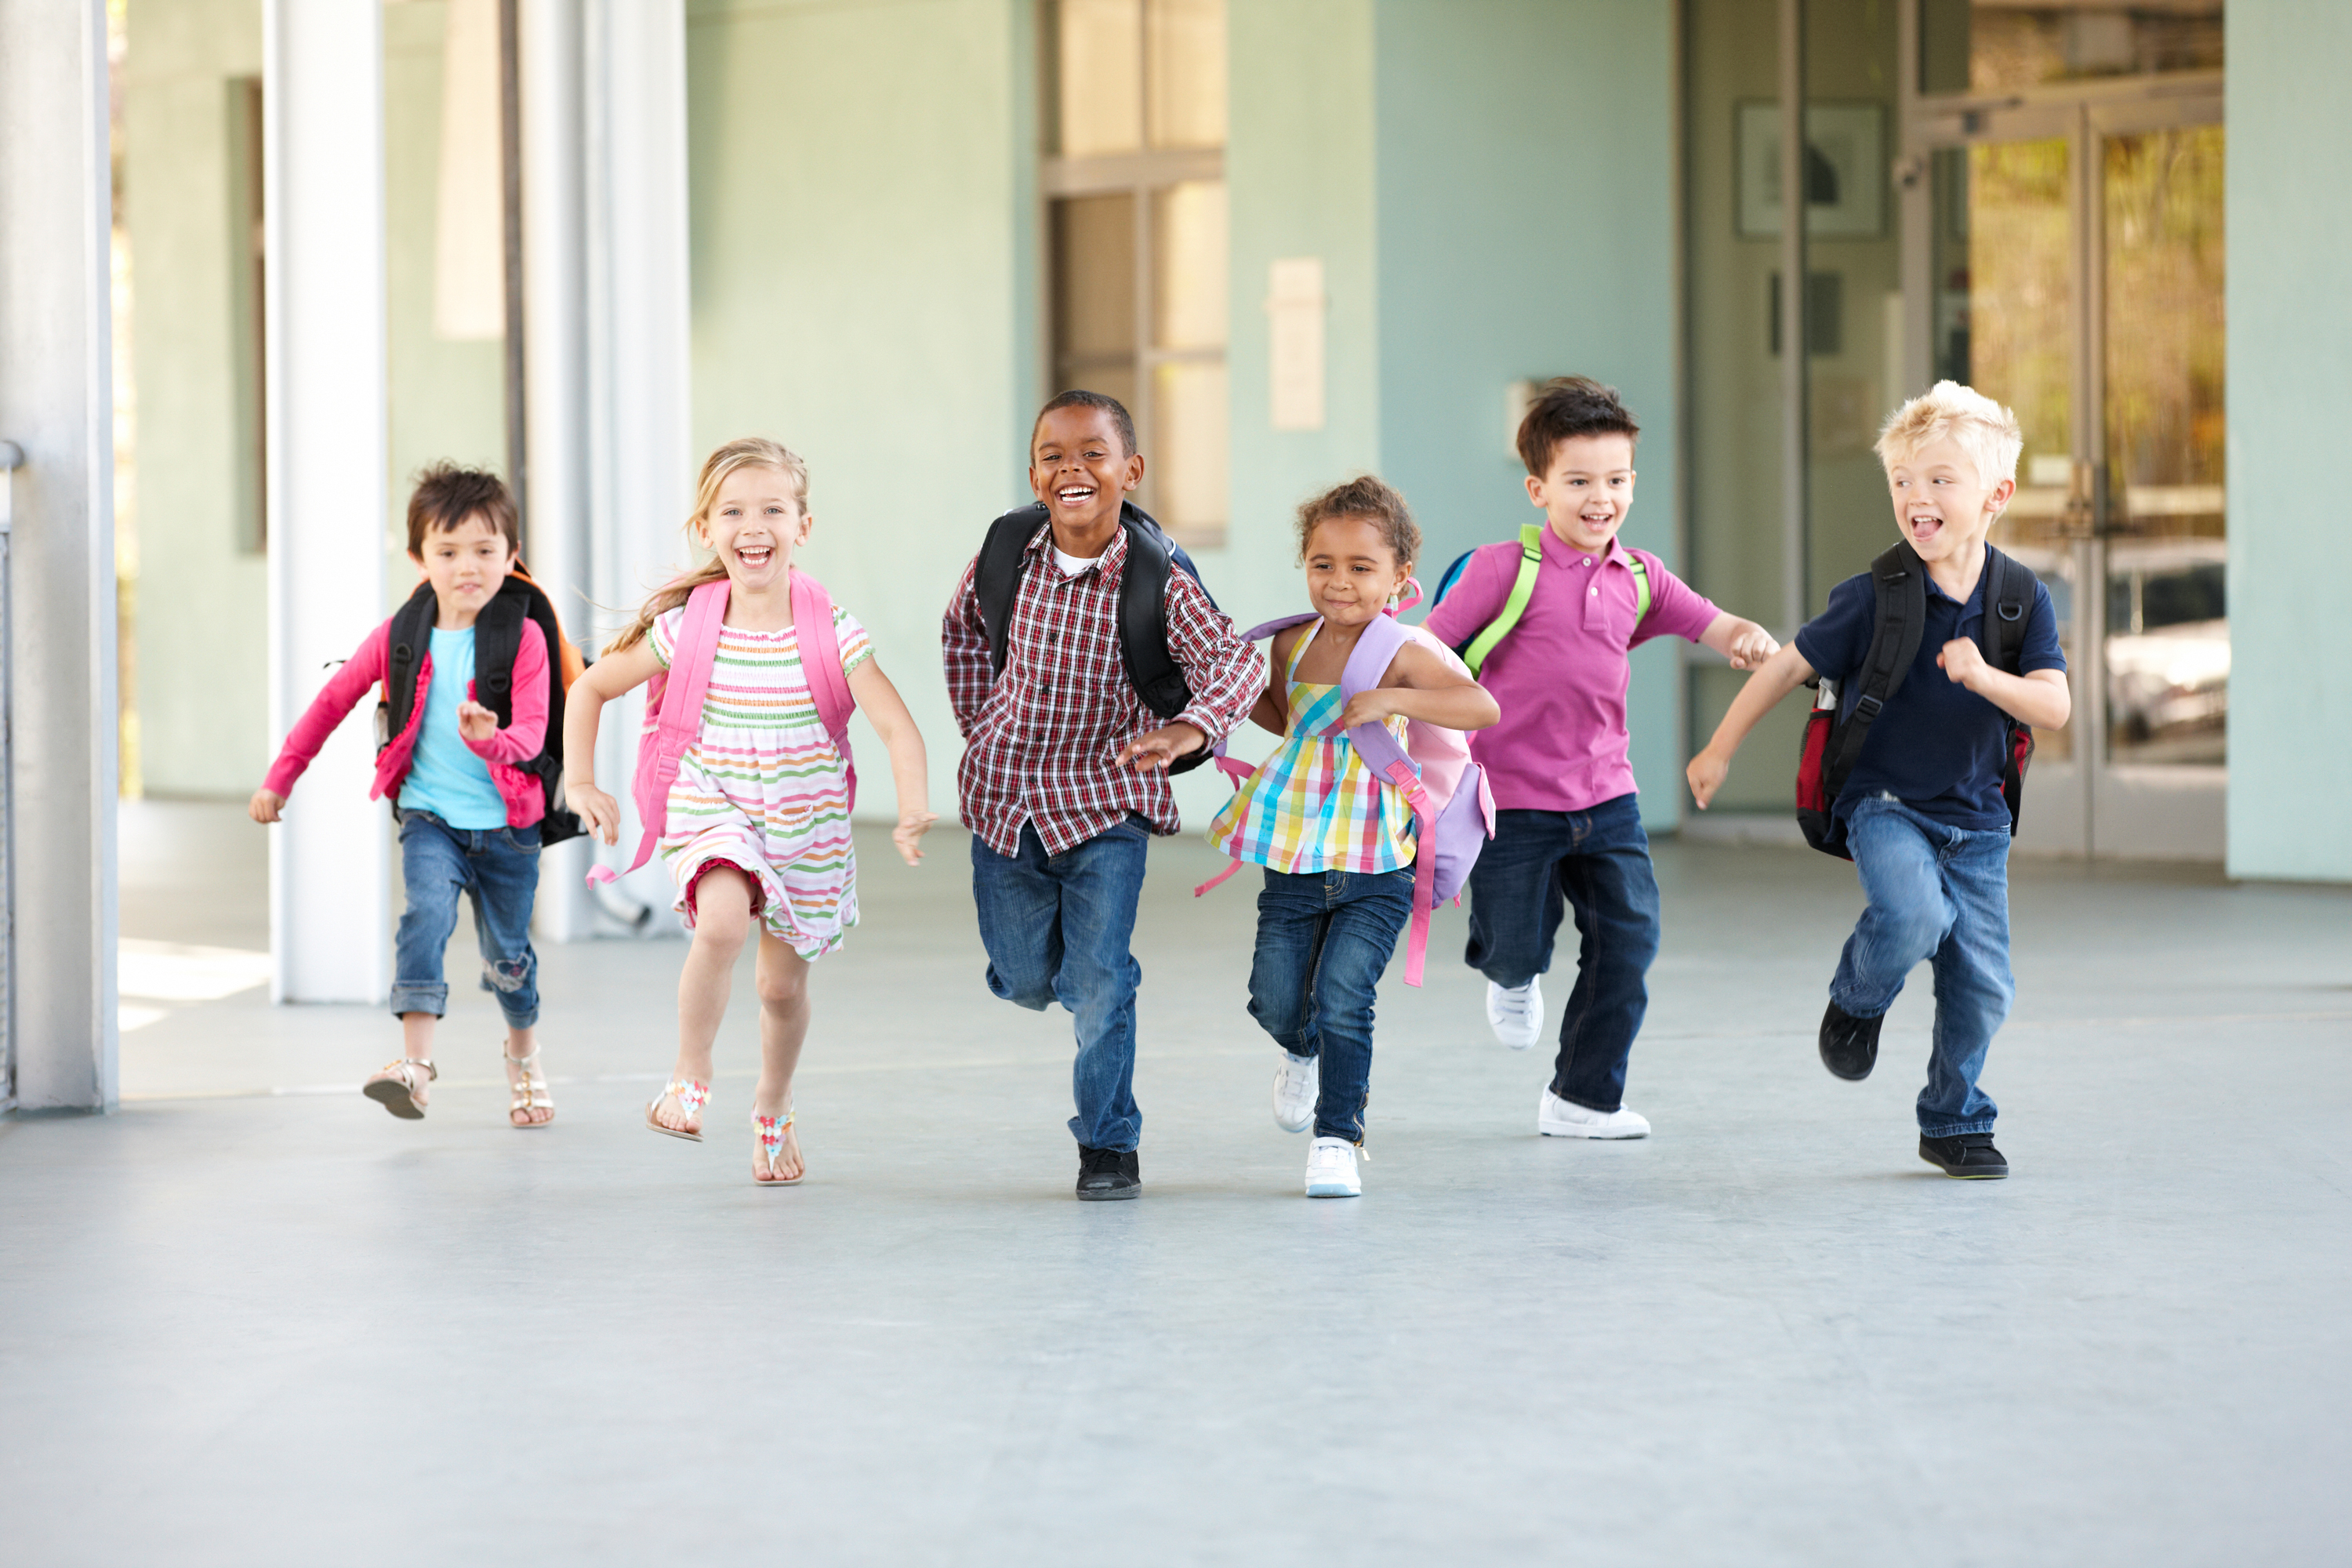 A group of children of different ages and ethnicities runs toward the camera.